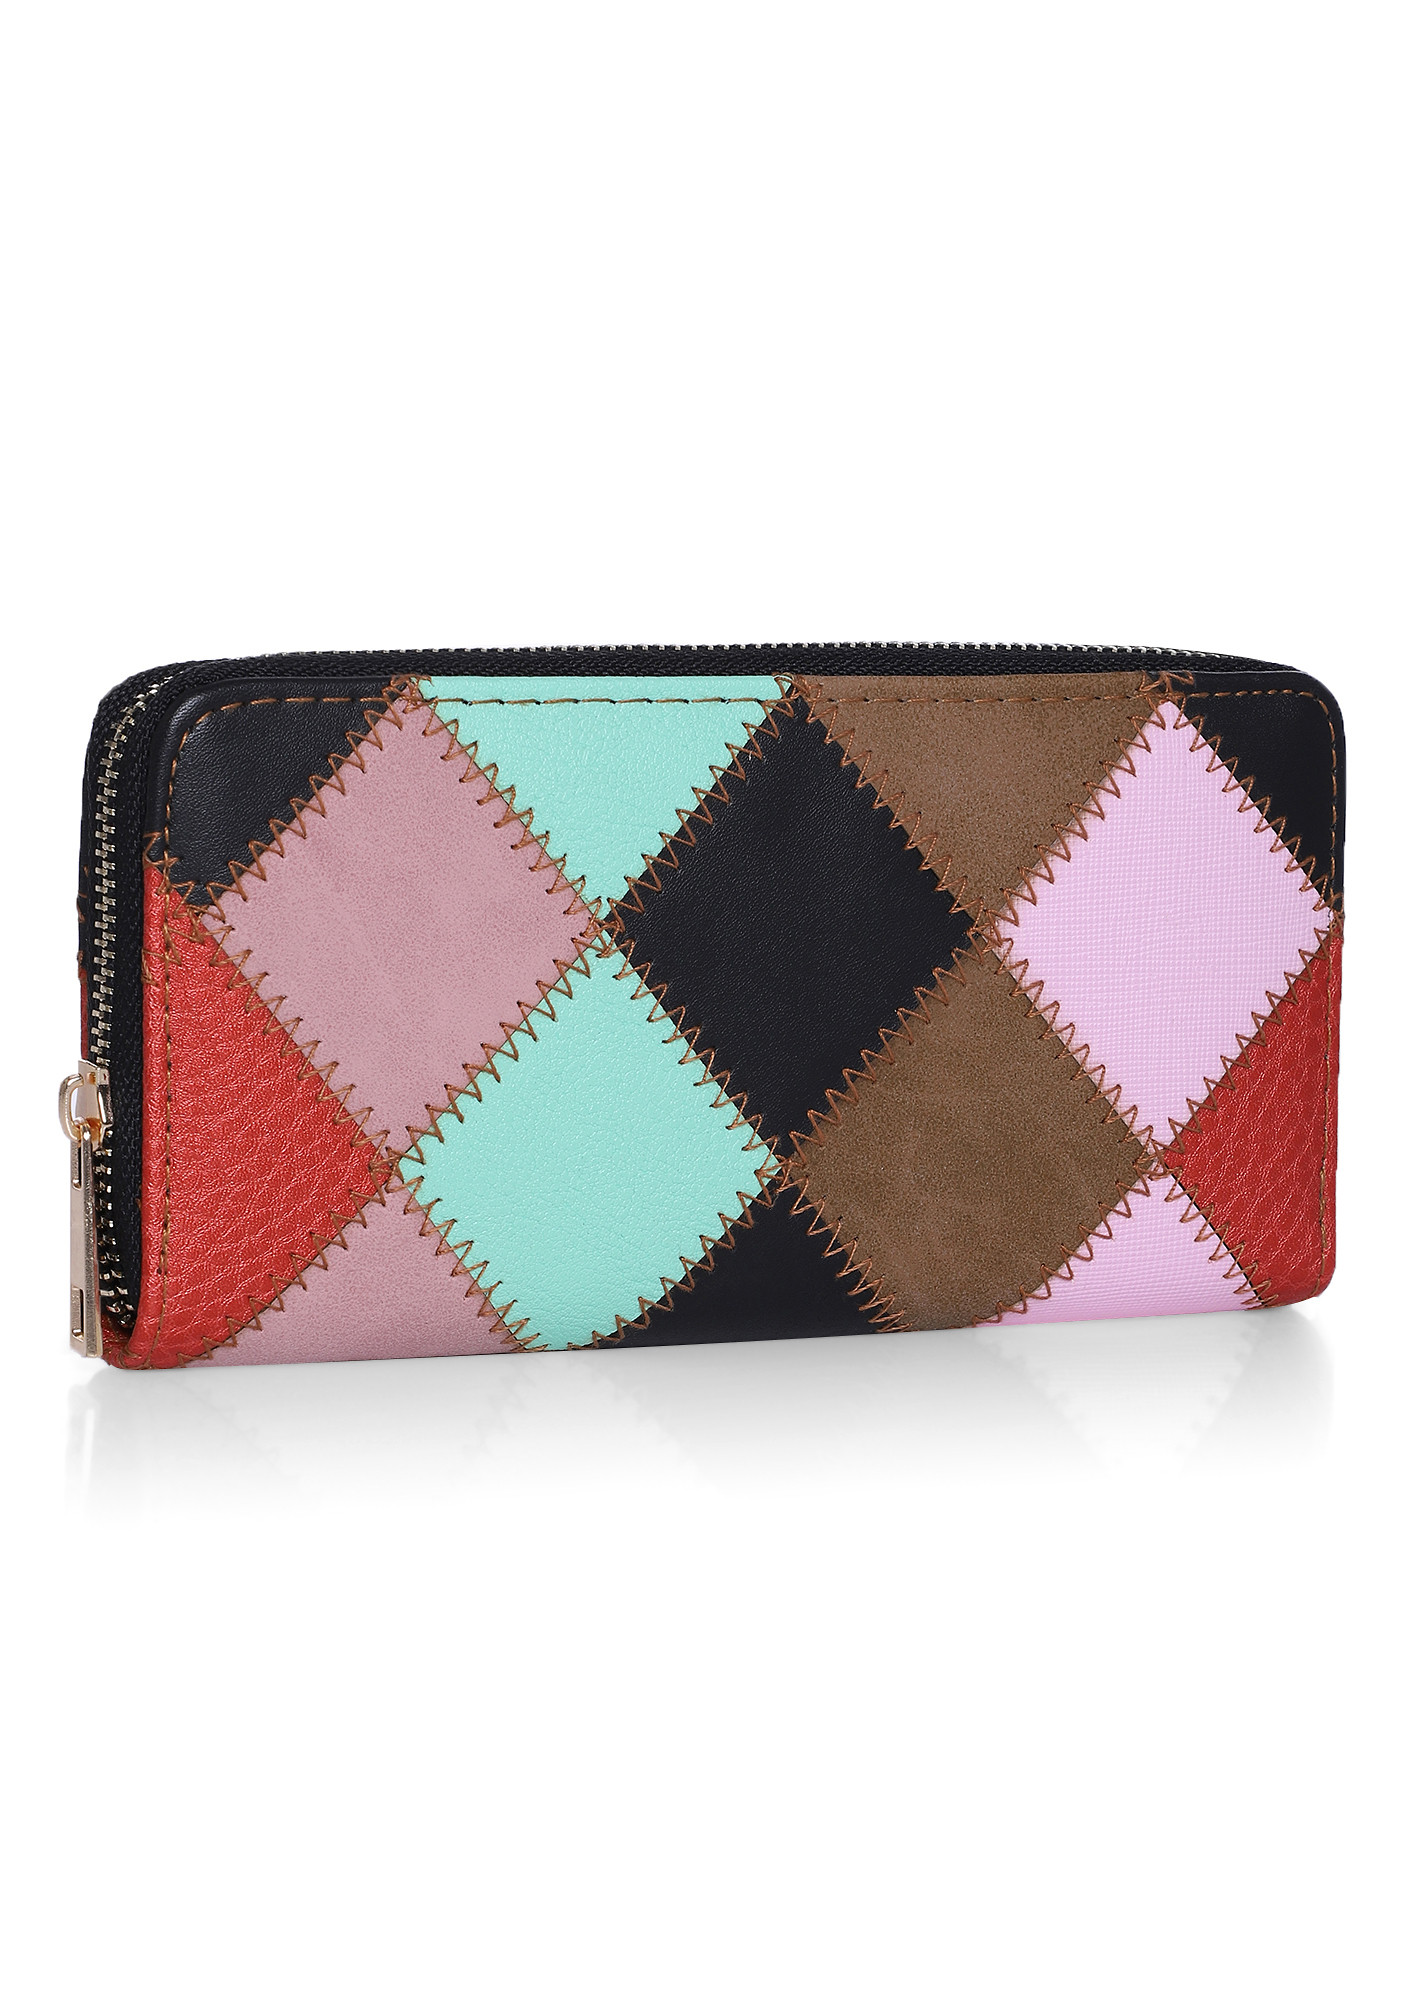 BEAUTIFULLY SEWED TOGETHER MULTI COLOR WALLET